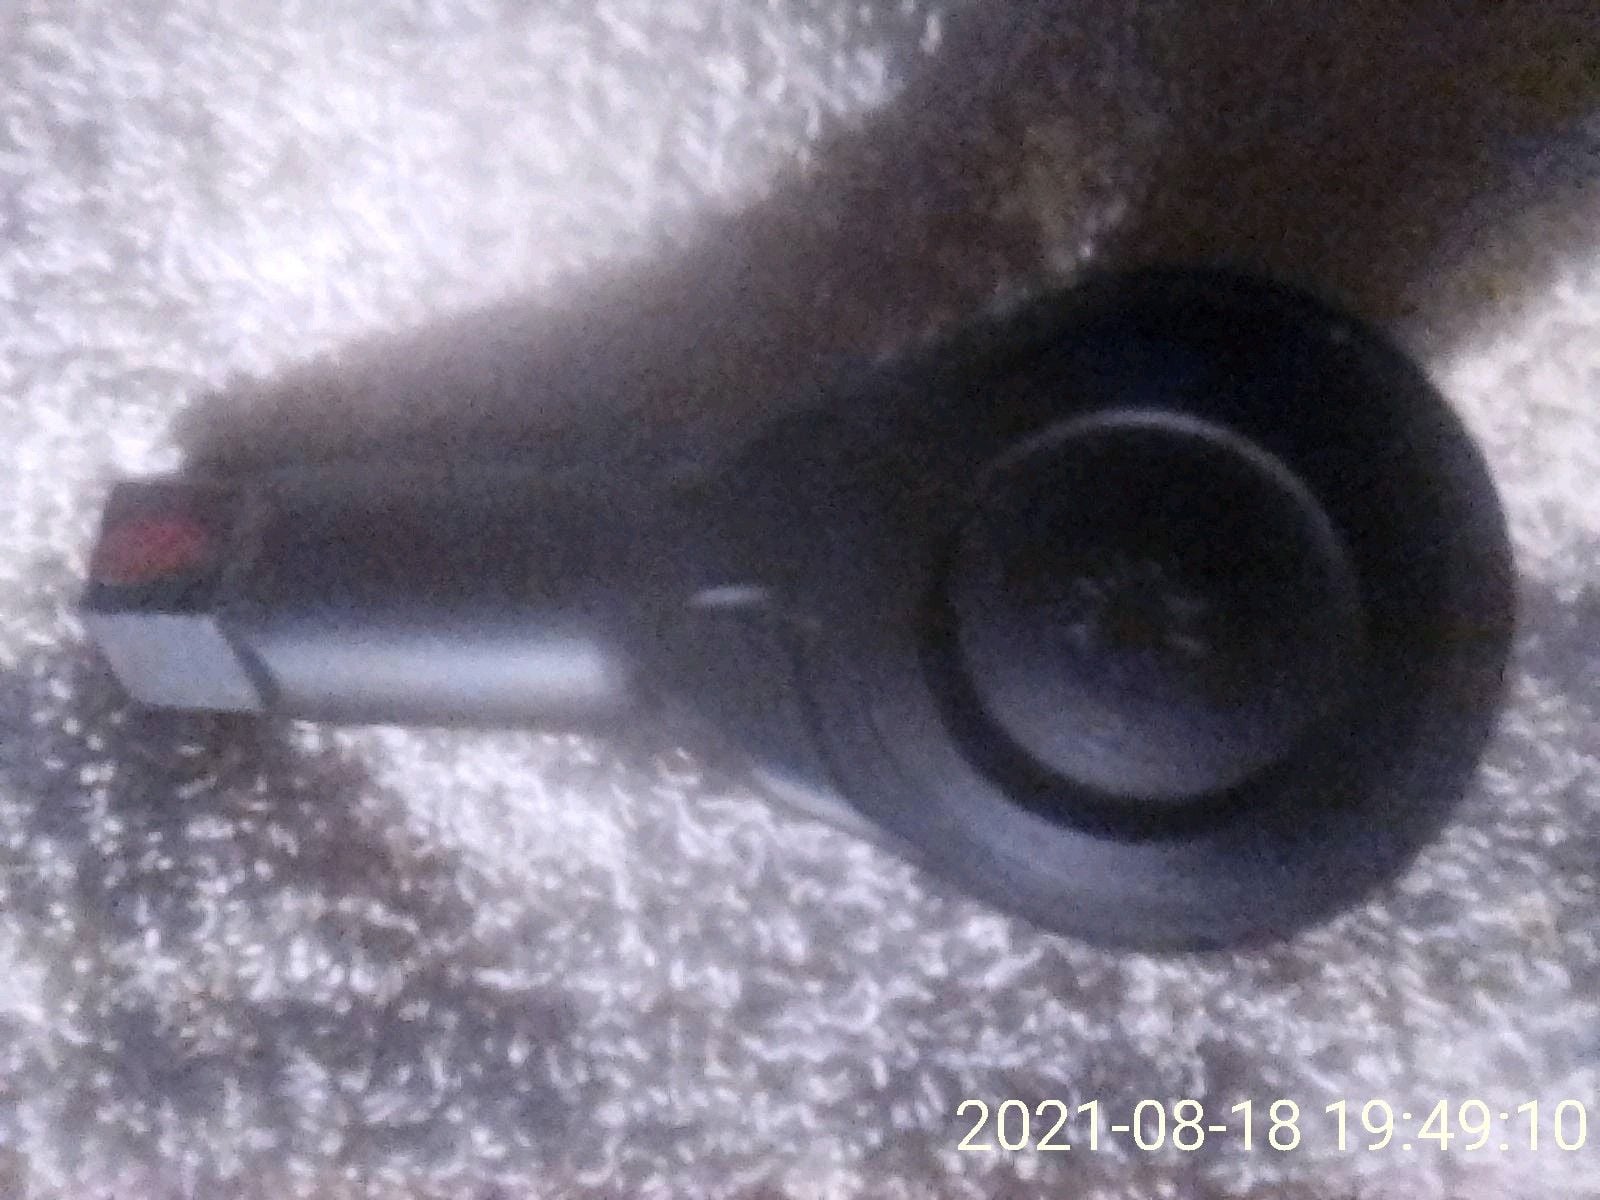 Steering/Suspension - FD - OEM End Ball Joint - New - San Jose, CA 95121, United States